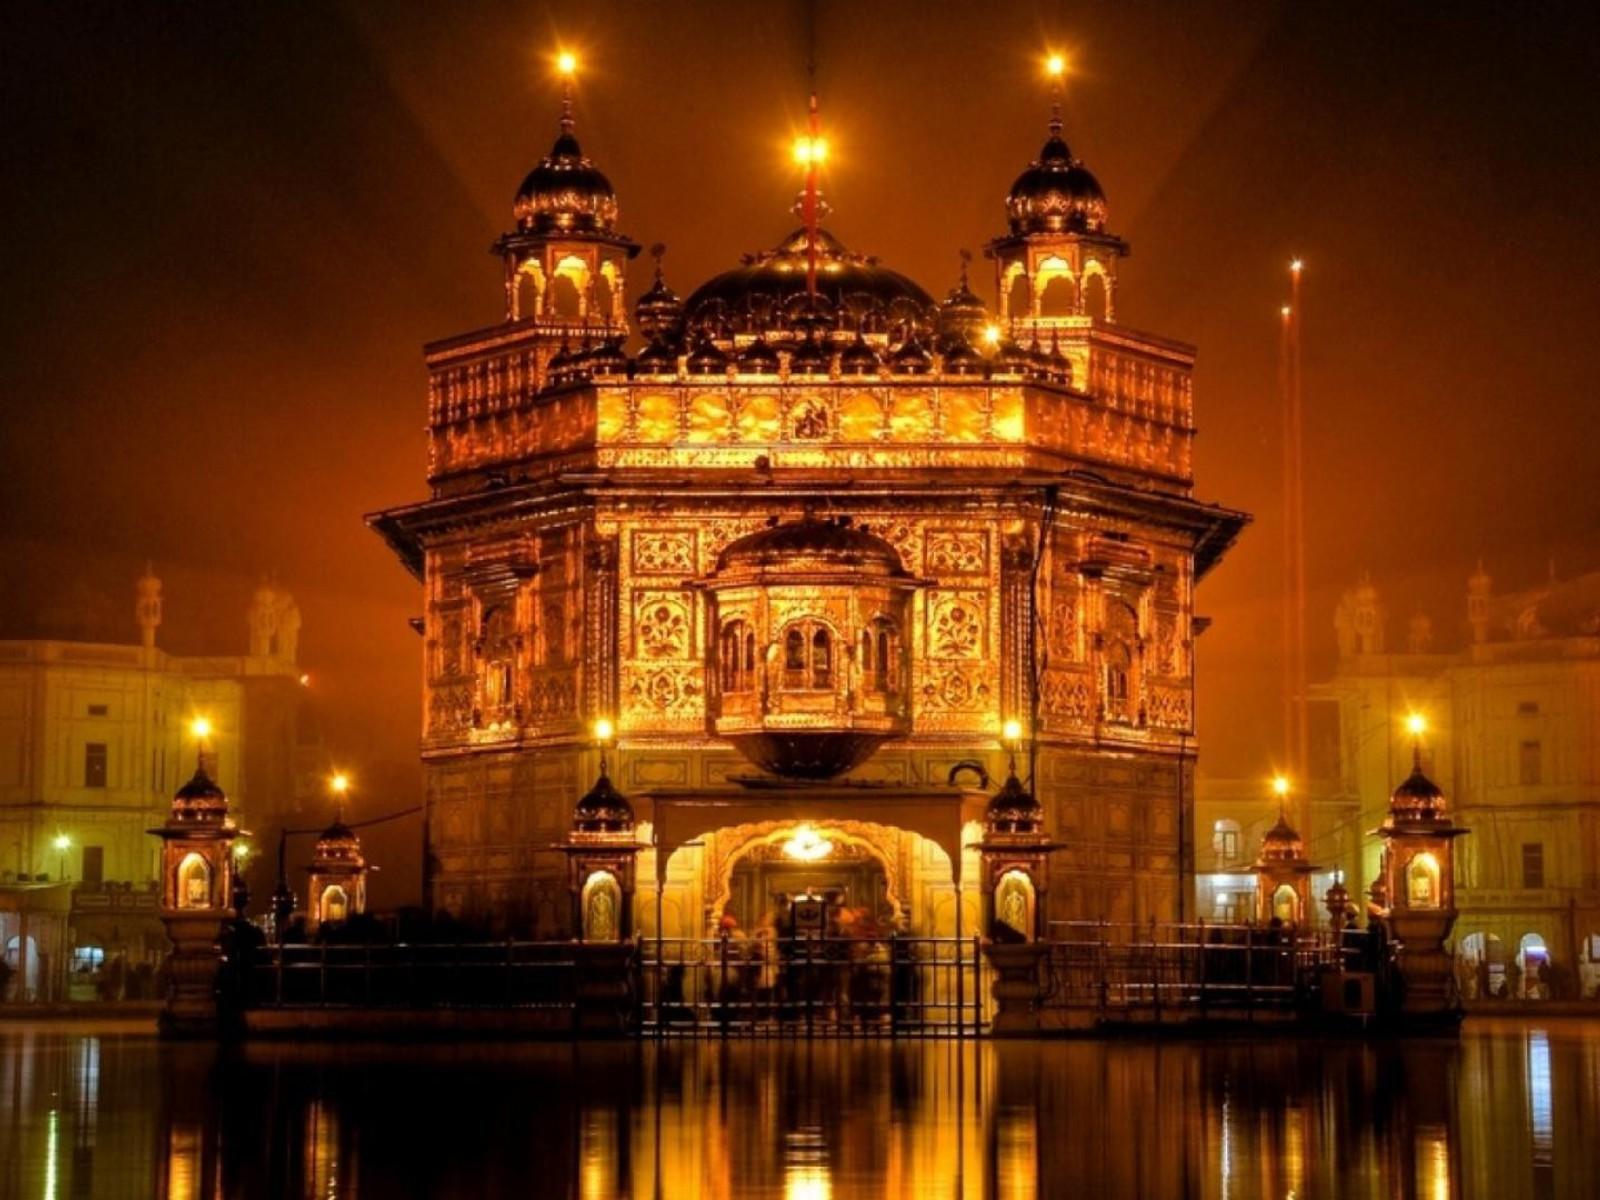 The golden temple at night in amritsar india wallpaper